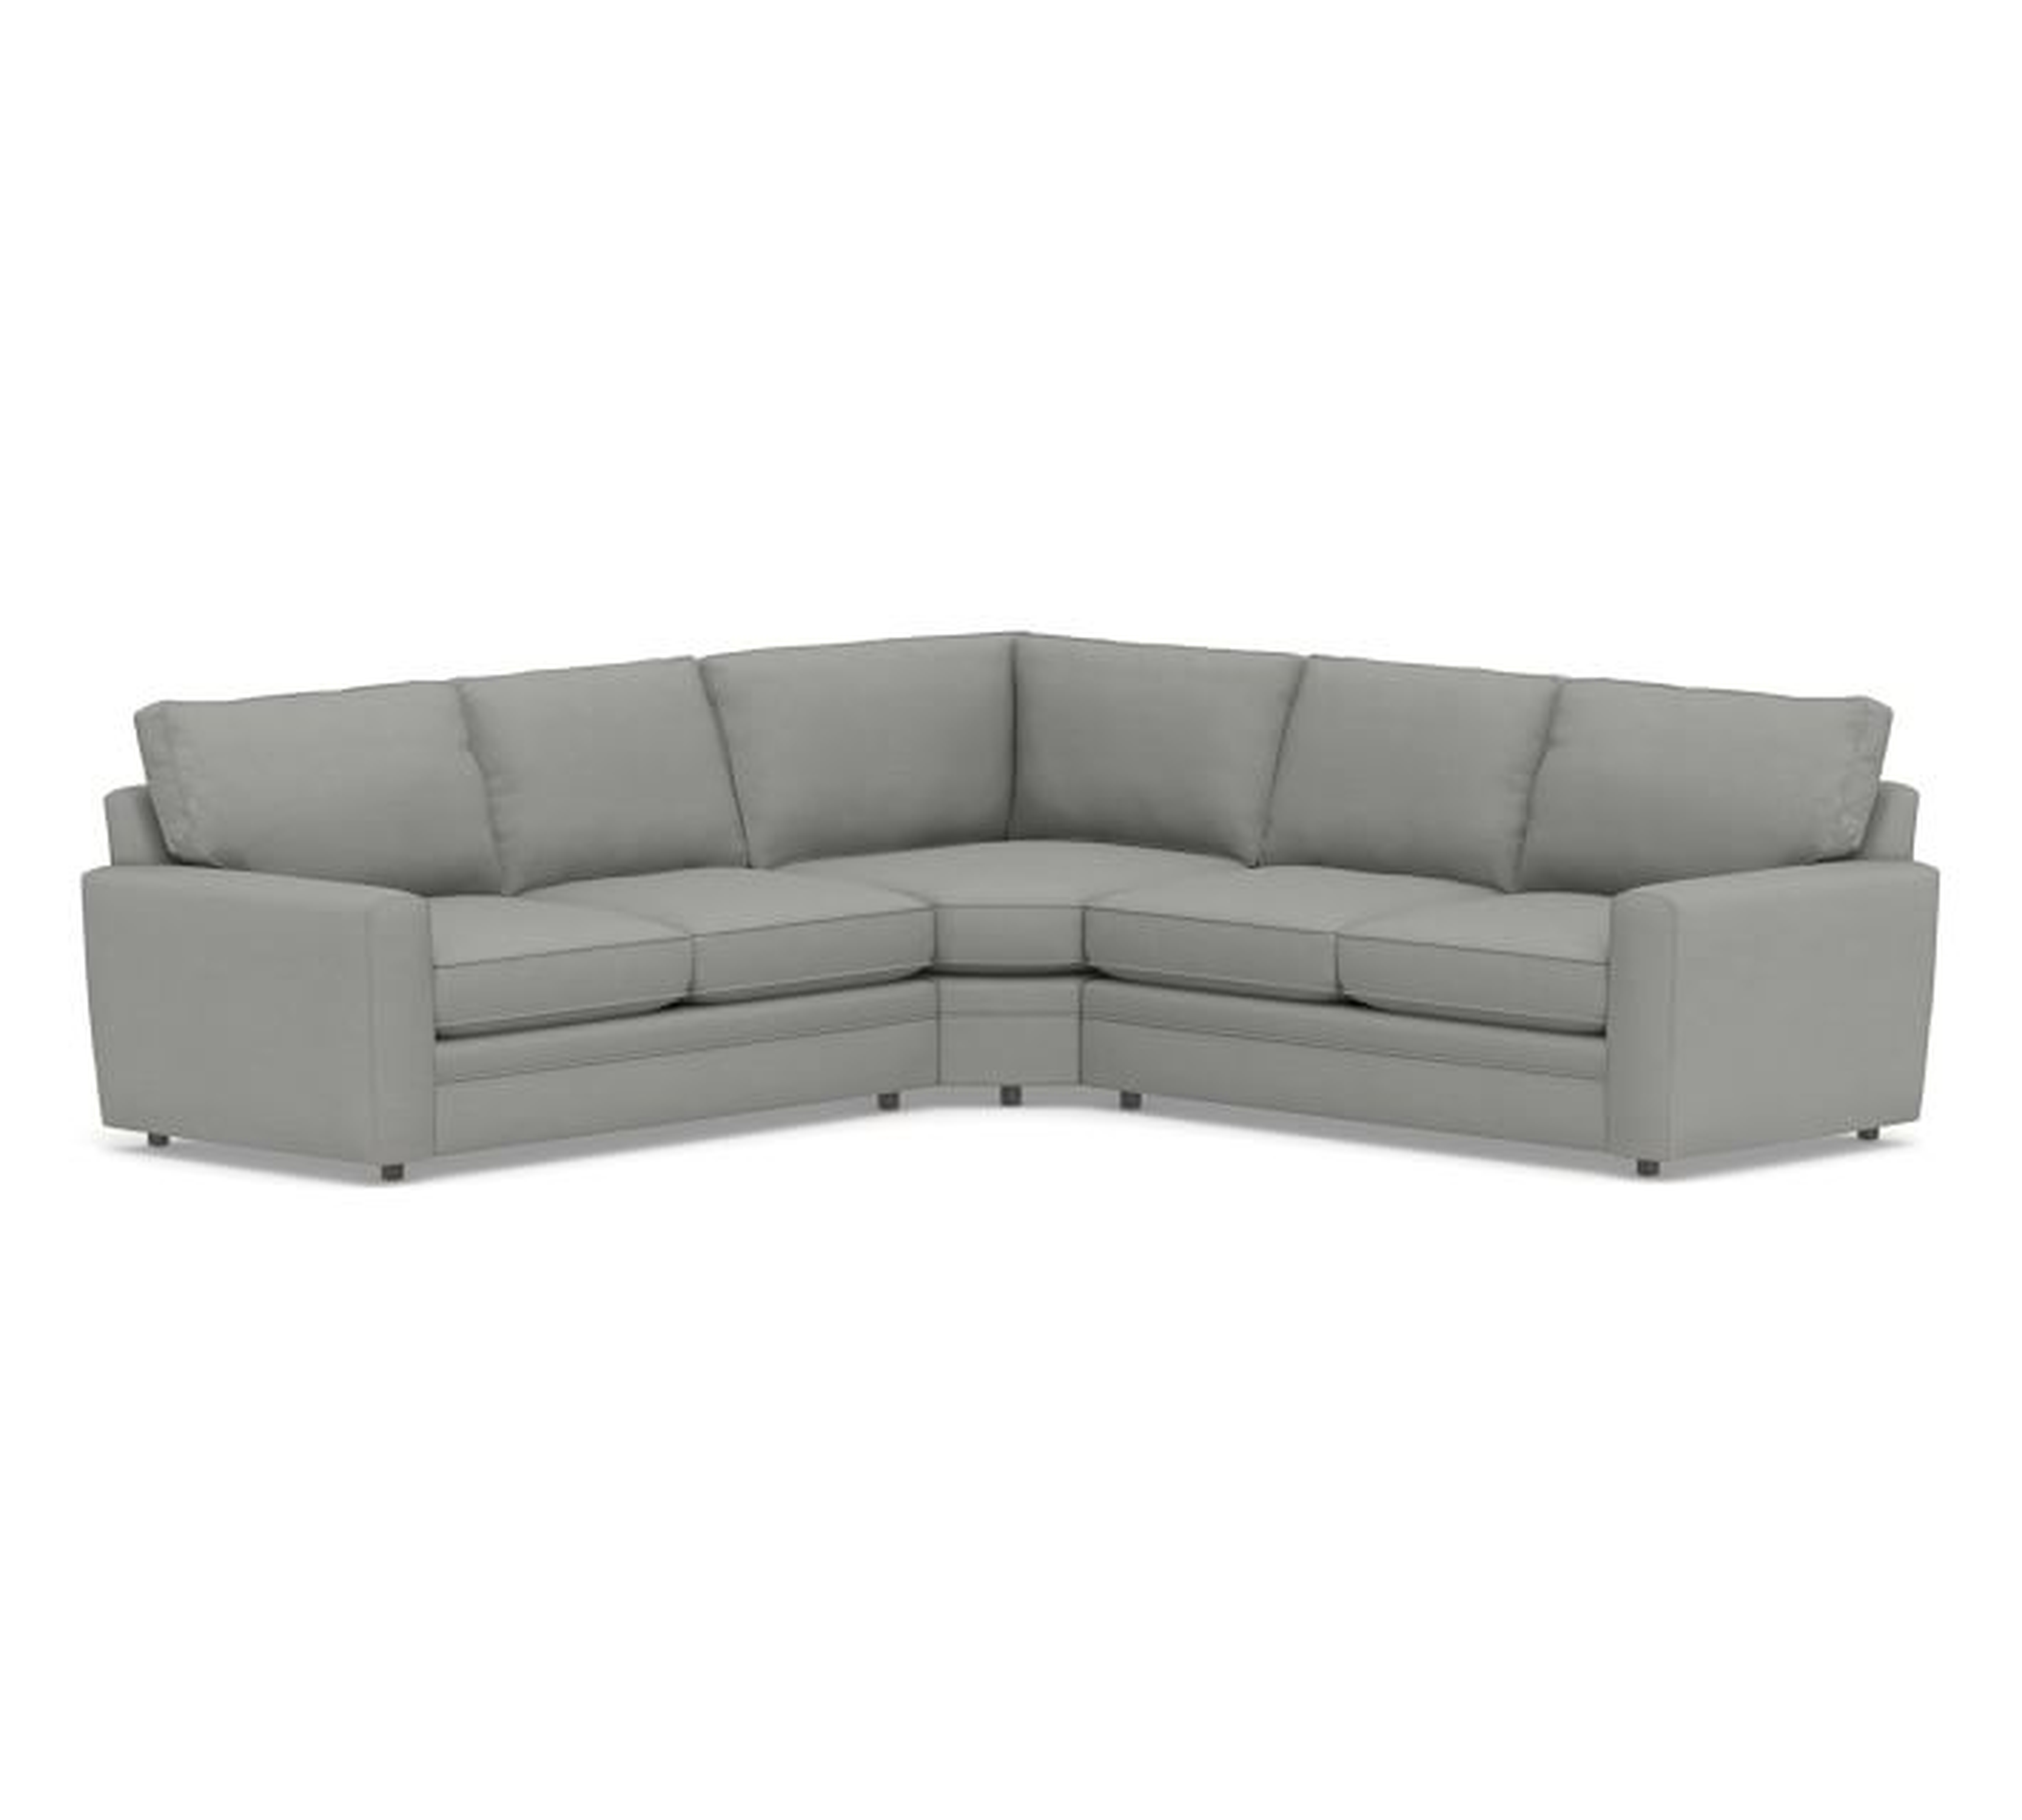 Pearce Square Arm Upholstered 3-Piece L-Sectional with Wedge - Pottery Barn